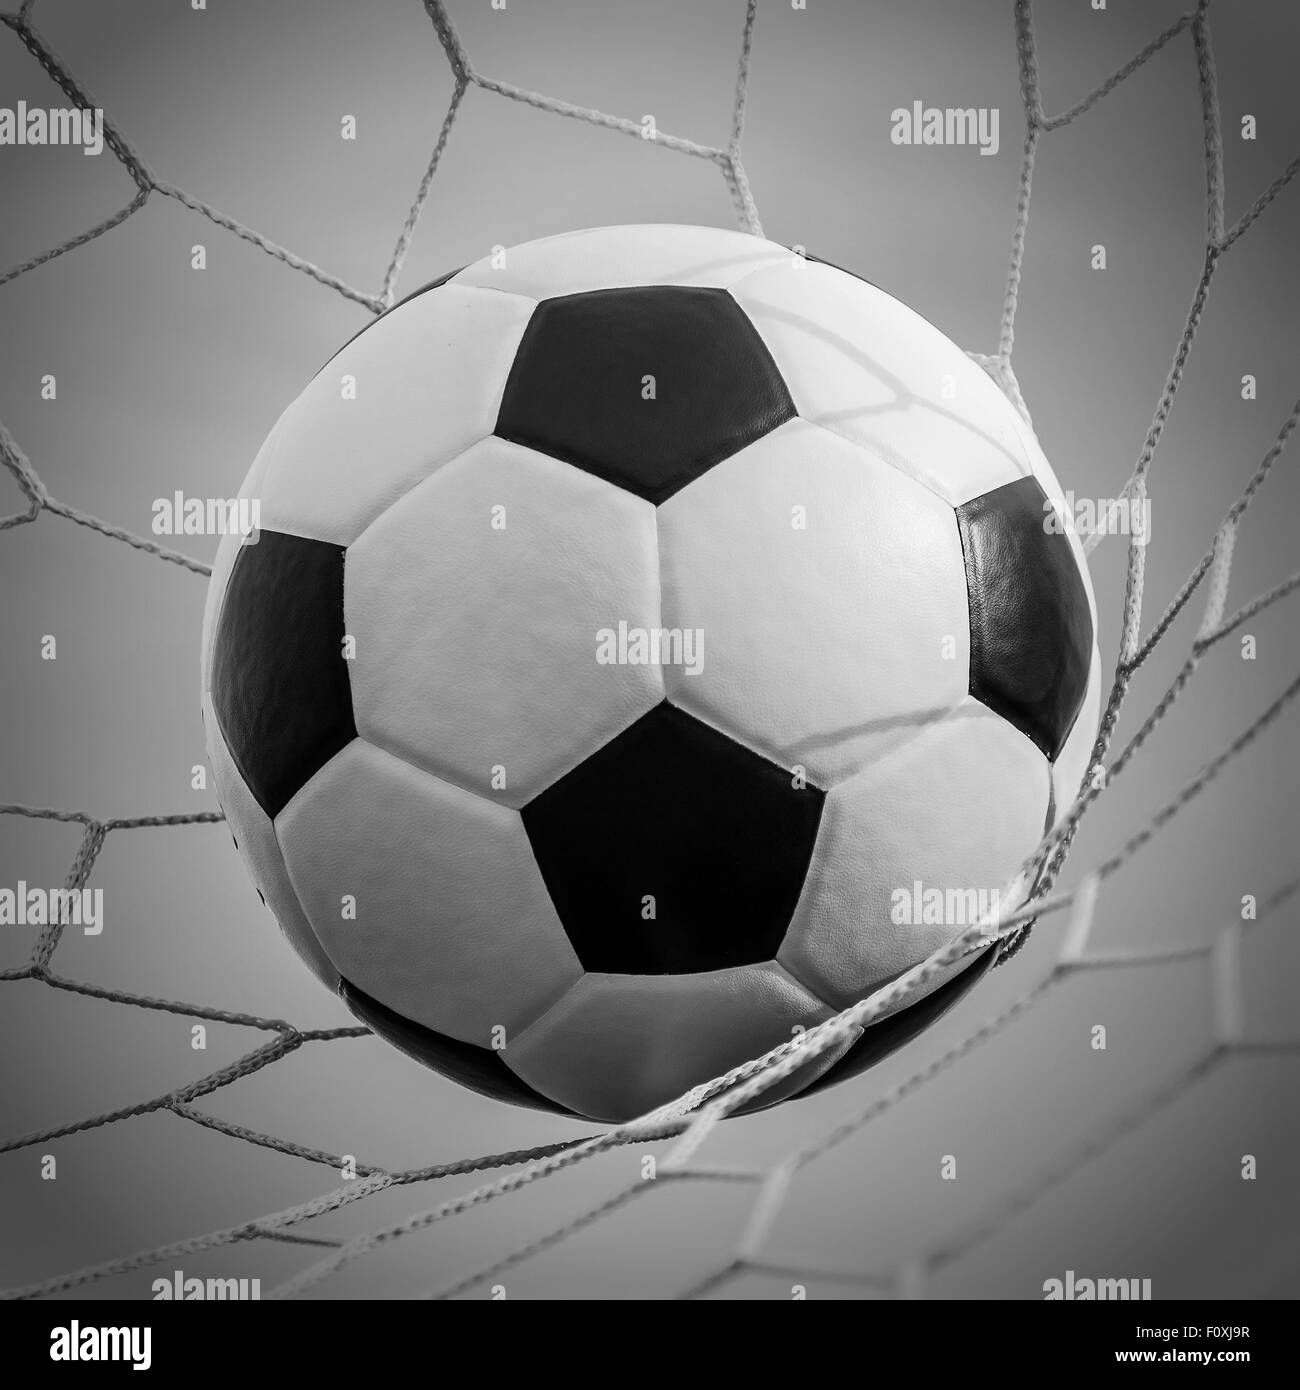 Soccer football in Goal net with Sky field. For sport concept. Stock Photo